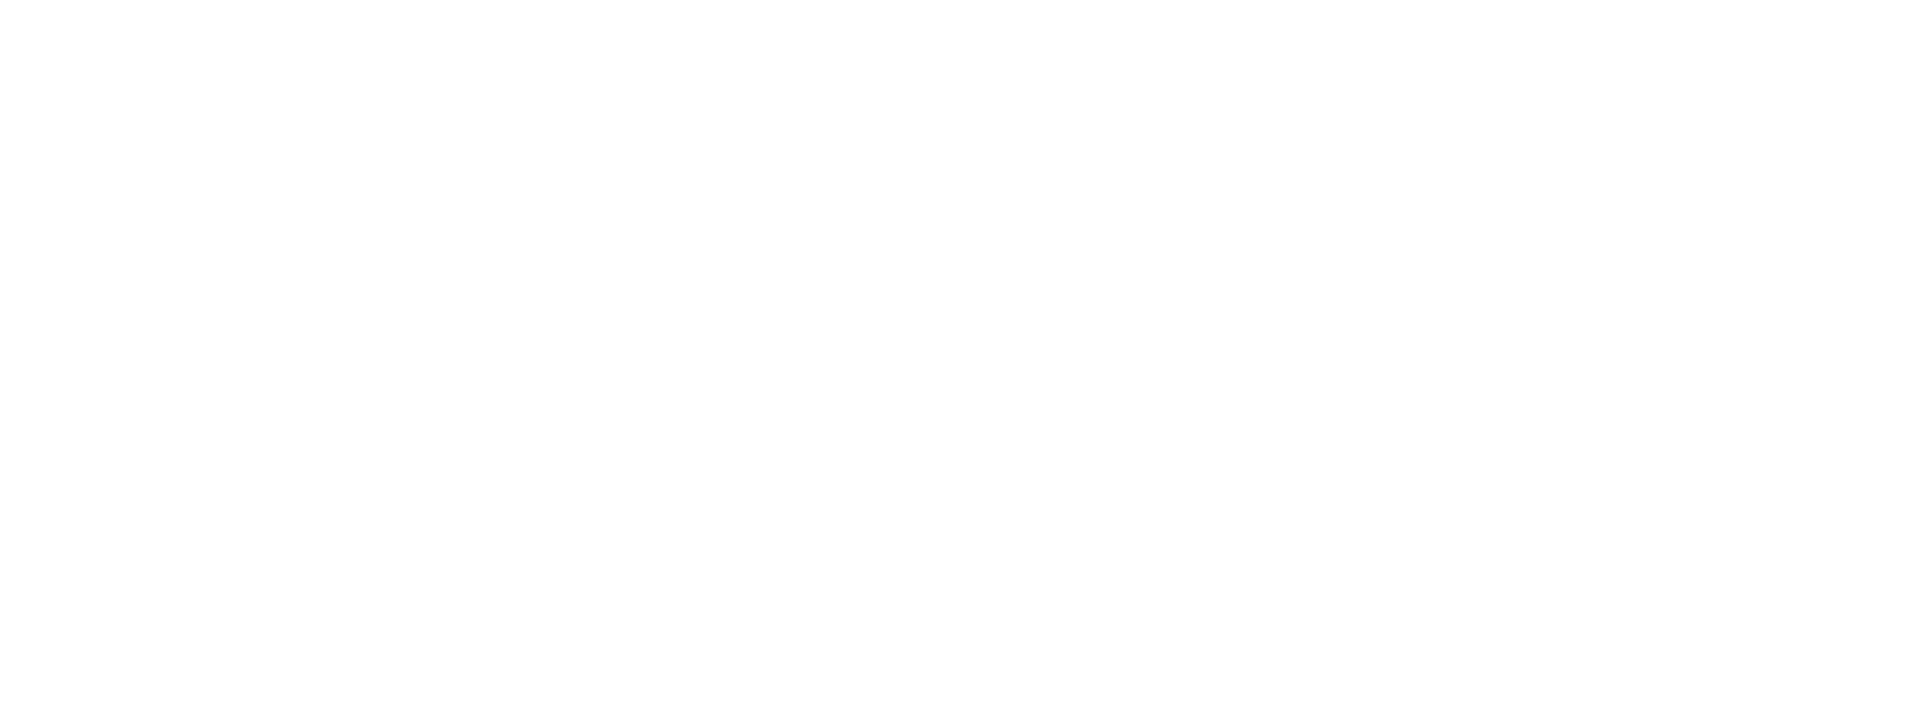 The Creator Factory